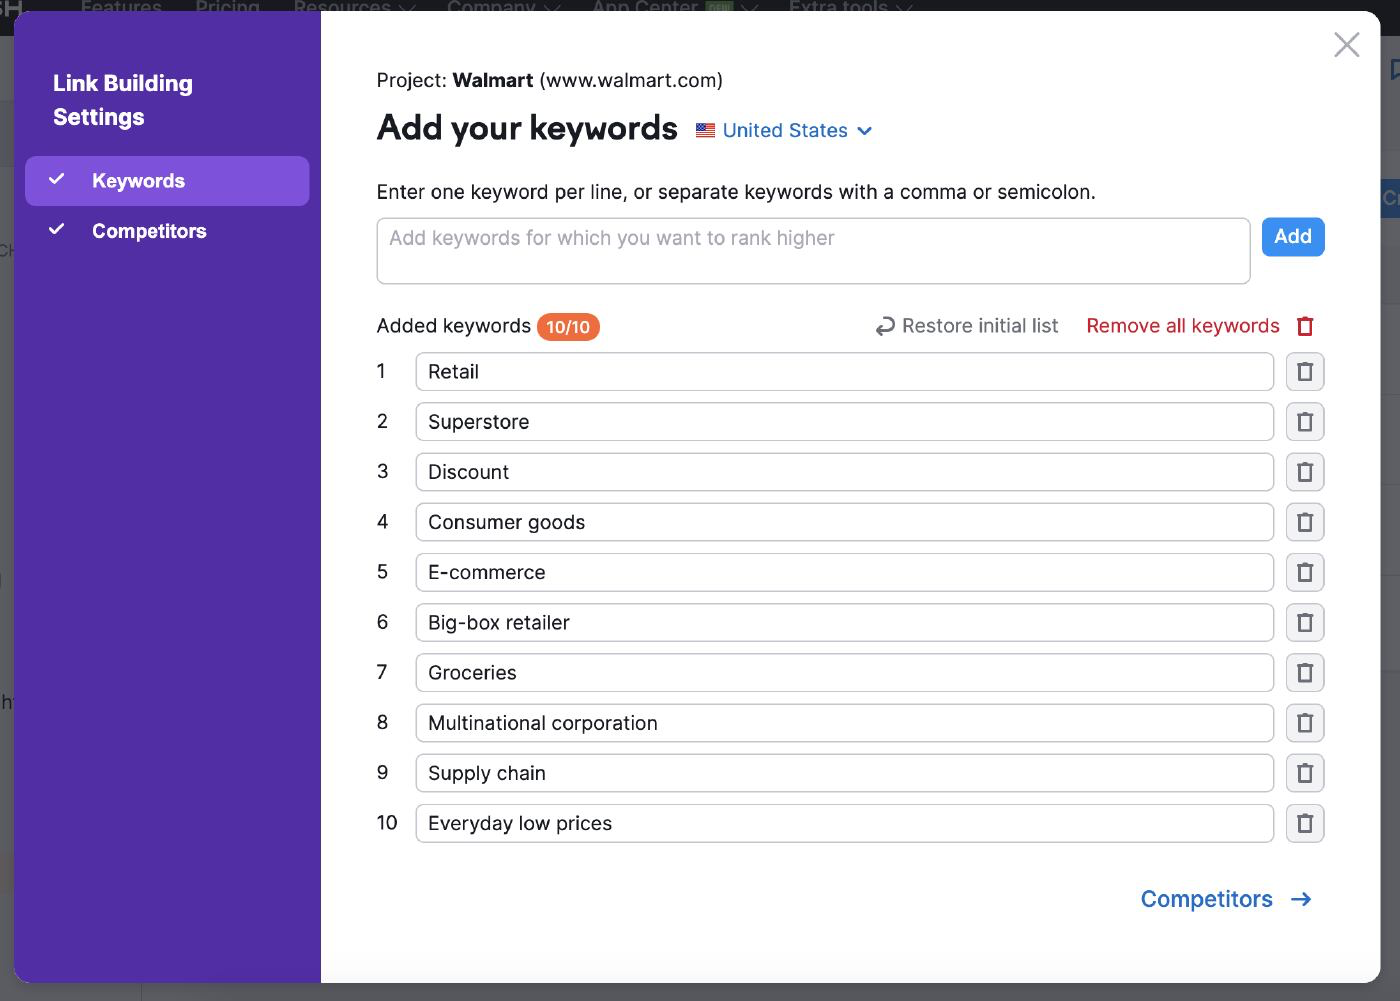 "Add your keywords" page in Link Building tool